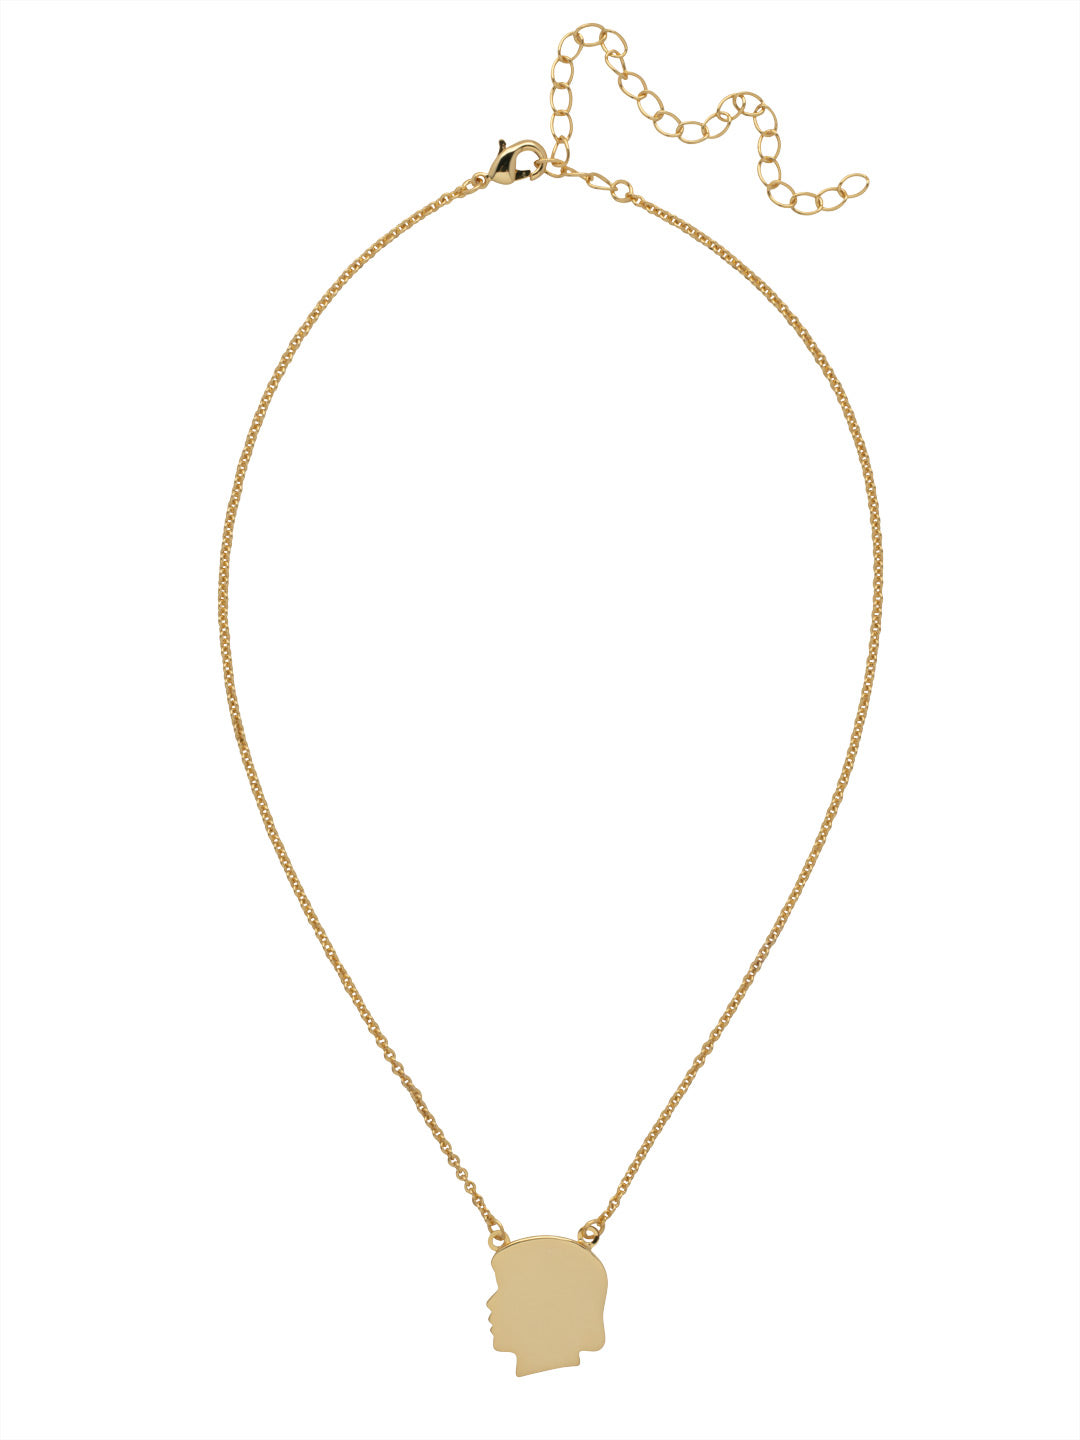 Girl Silhouette Pendant Necklace - 4NFF100BGMTL - <p>The Girl Silhouette Pendant Necklace features a metal silhouette of a girl on an adjustable simple chain, secured with a lobster claw clasp. From Sorrelli's Bare Metallic collection in our Bright Gold-tone finish.</p>